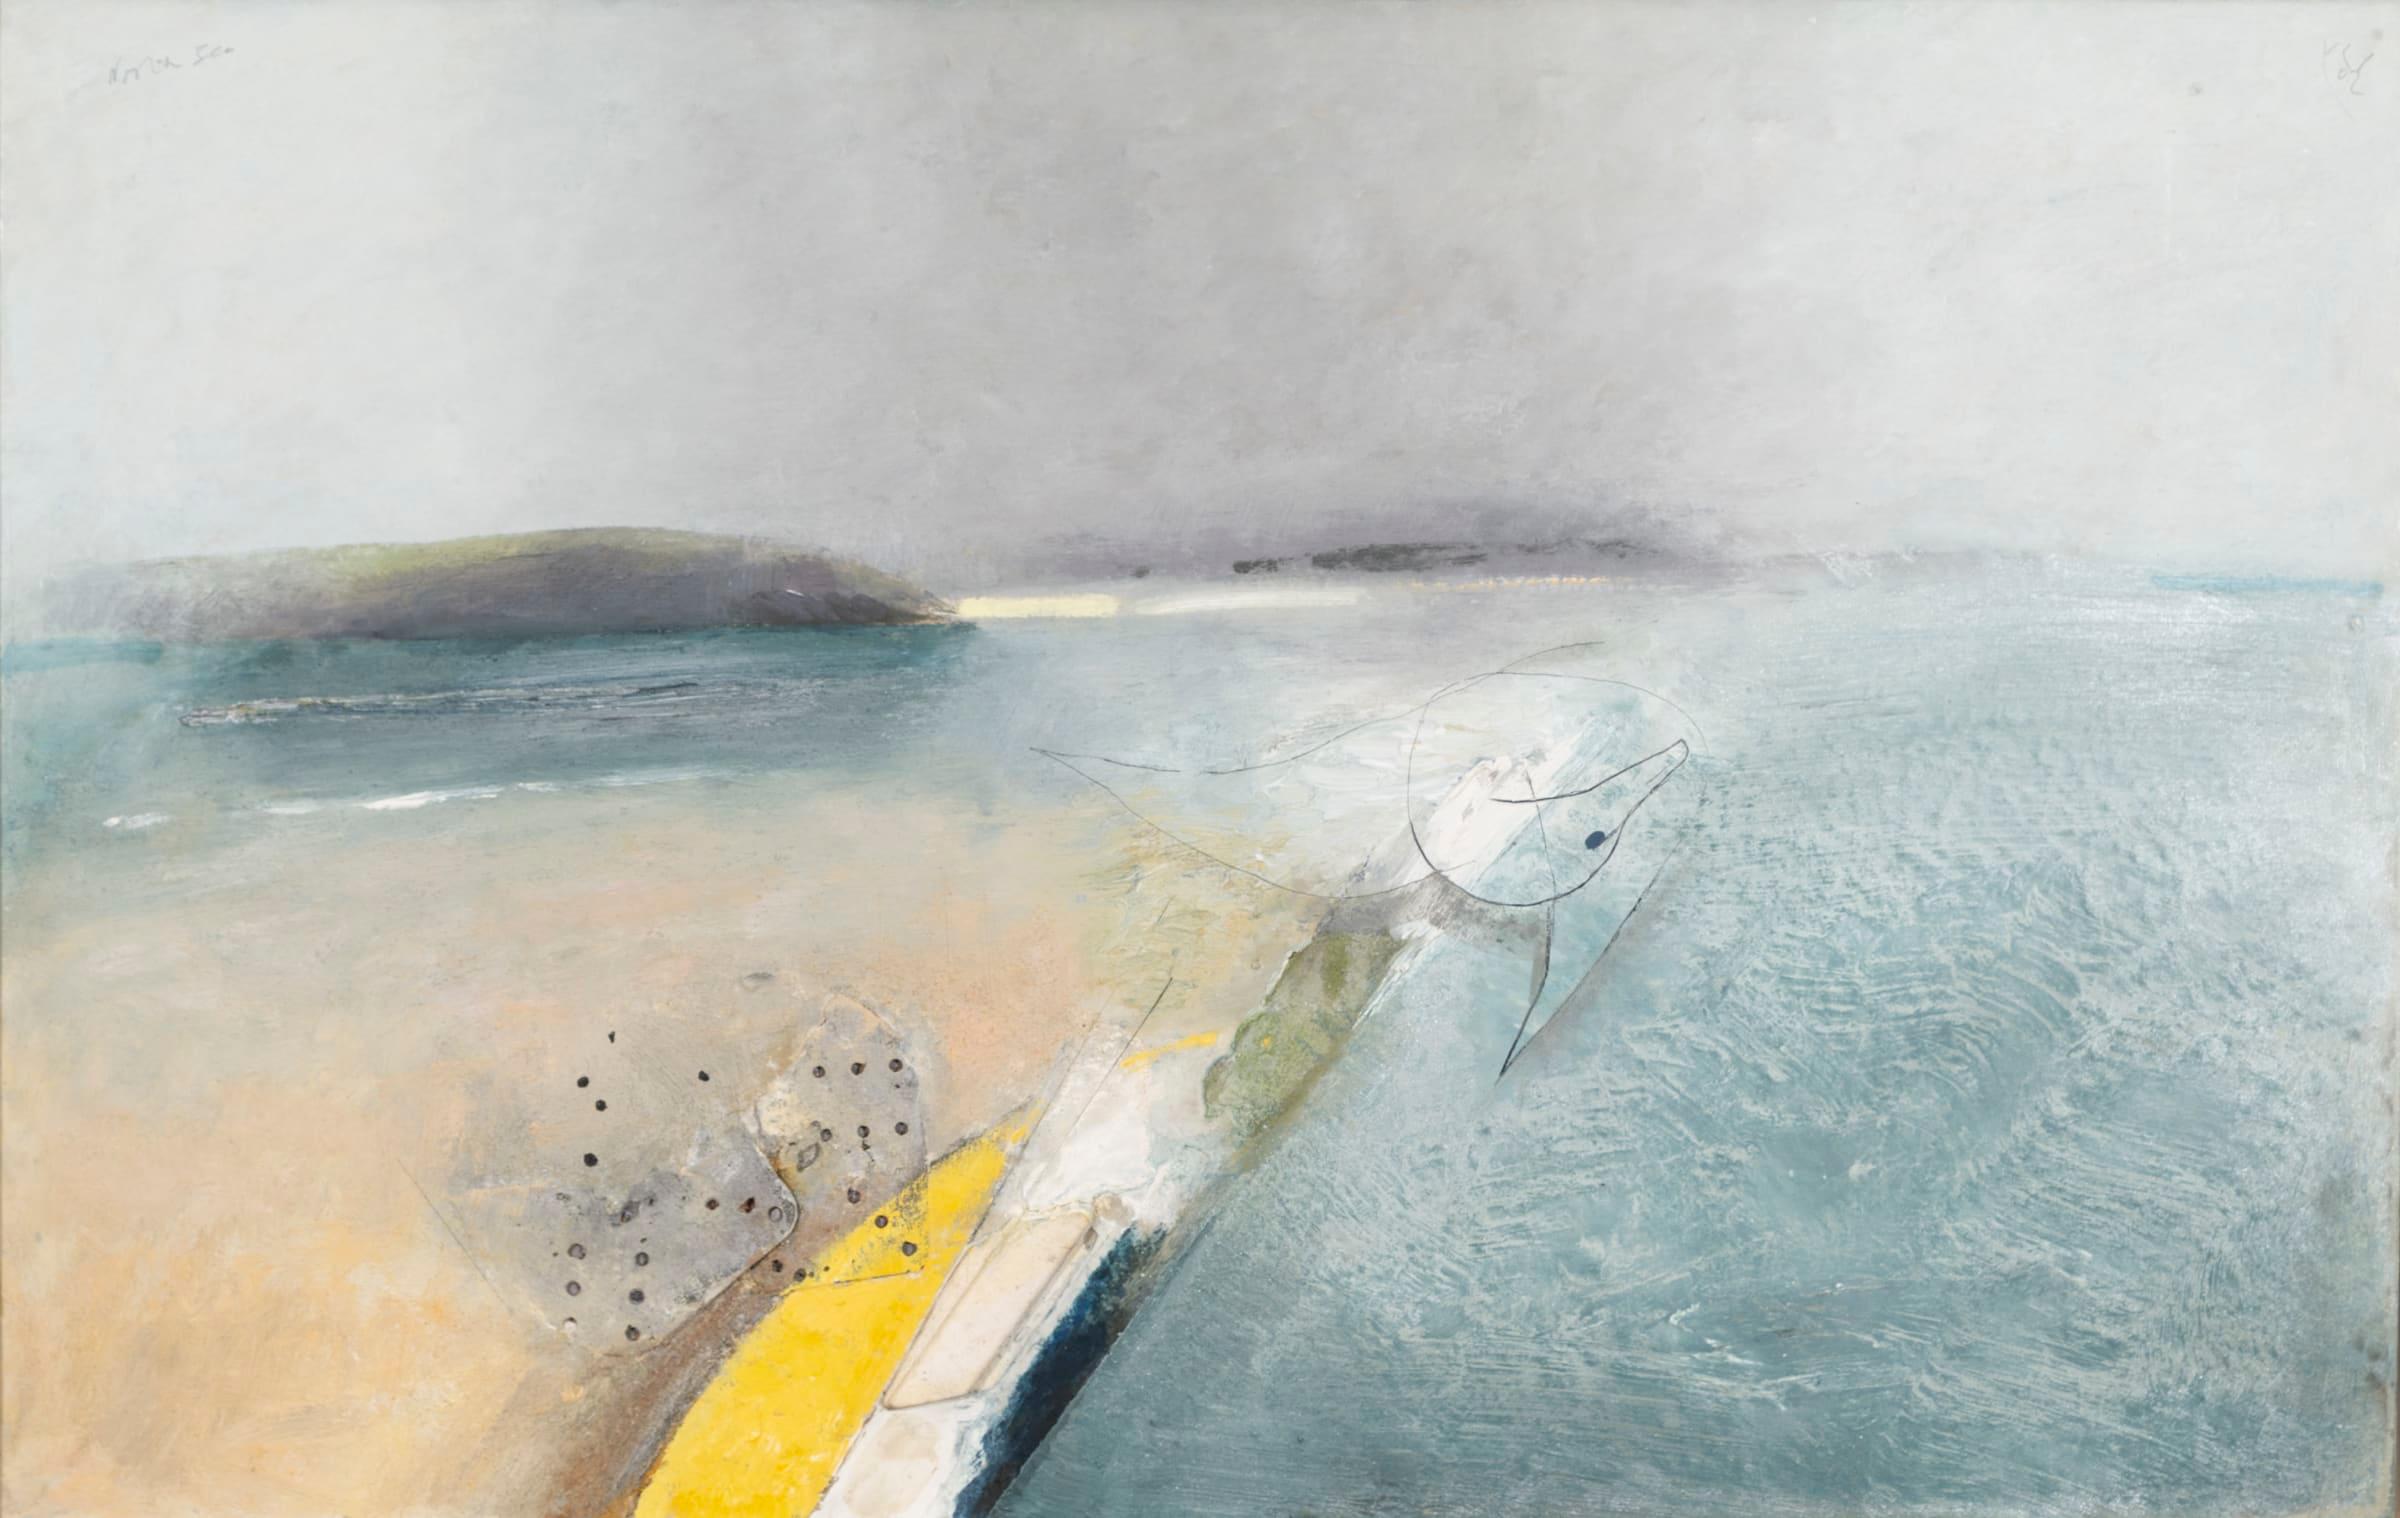 North Sea, Oil on Board Painting by Keith Purser B. 1944, 2002

Additional information:
Medium: Oil, sand and found objects on board
Dimensions: 61 x 96.5 cm
24 1/8 x 38 in
Signed with initials, dated and titled

Keith Purser lives and works on the